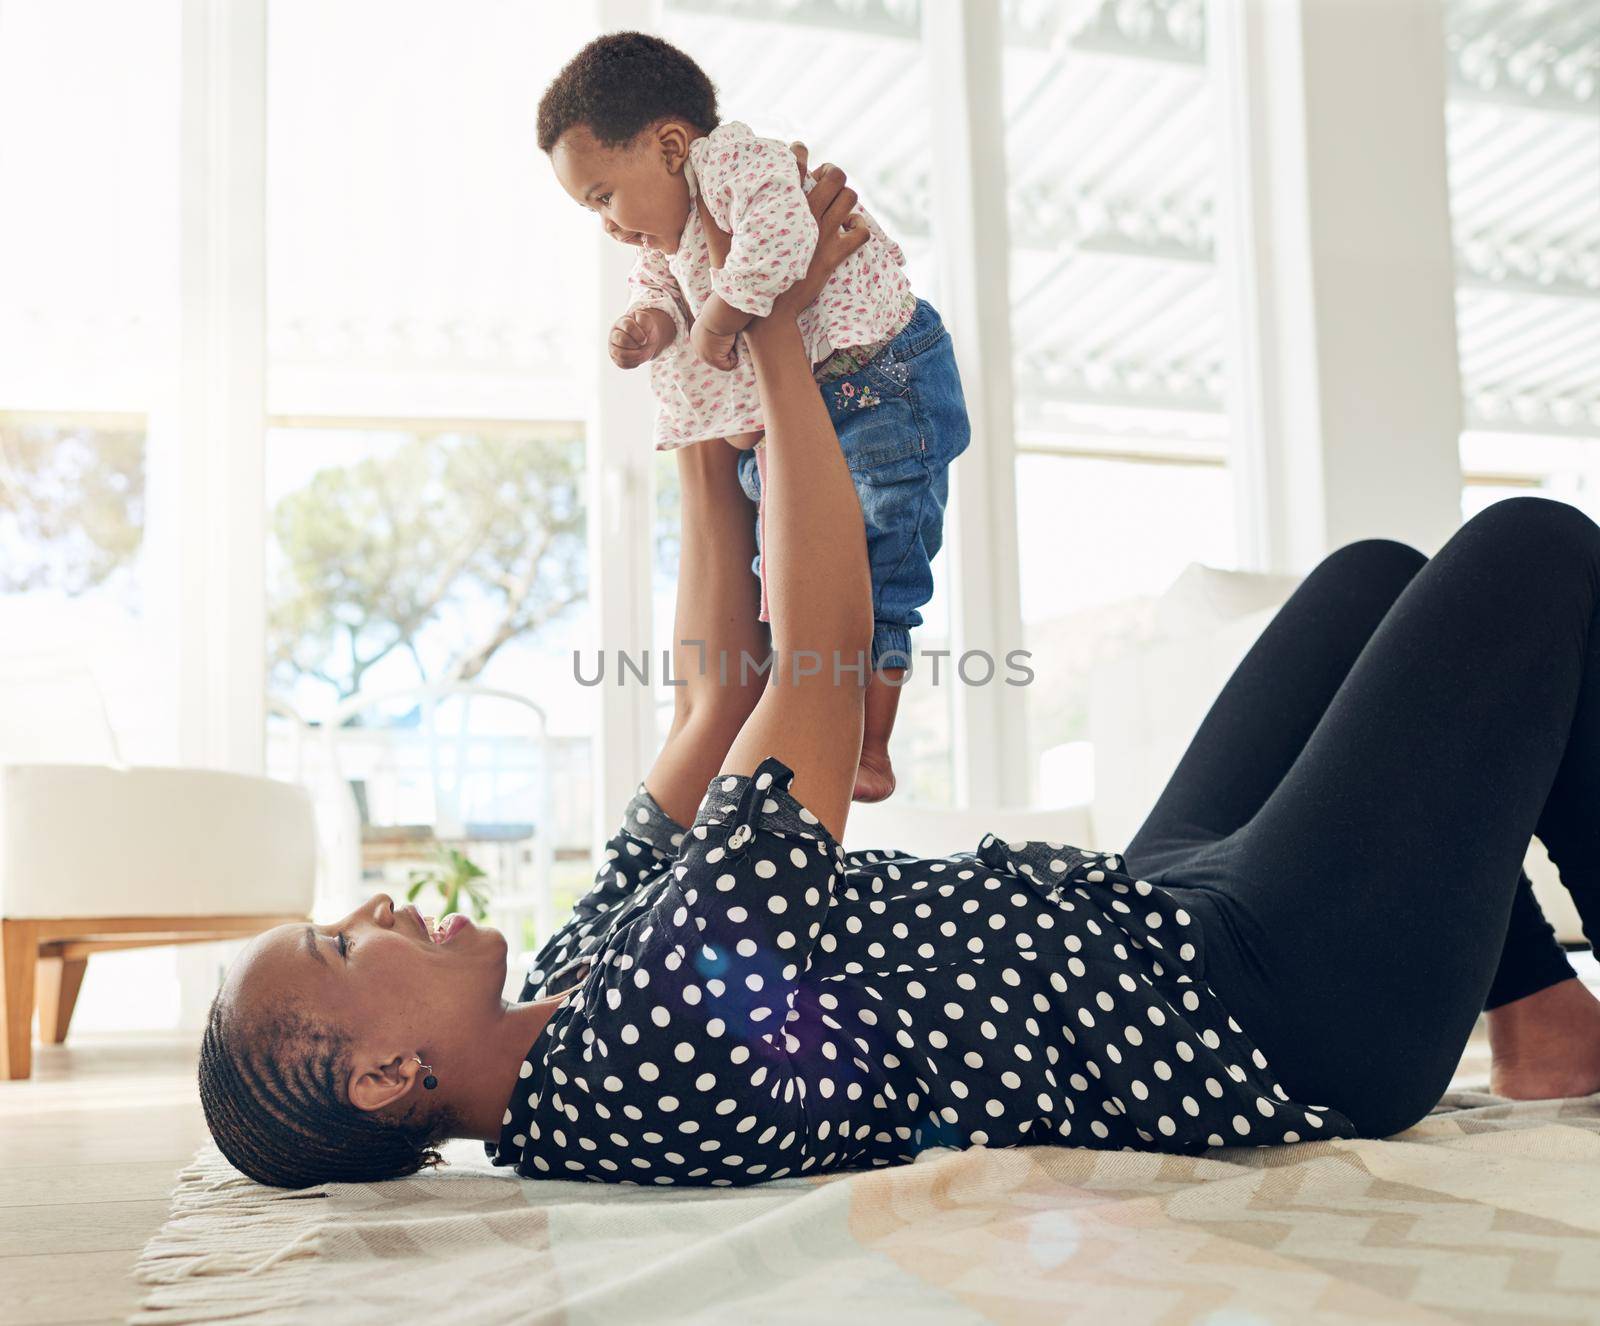 The most important person in her life. a mother holding her baby girl up in the air